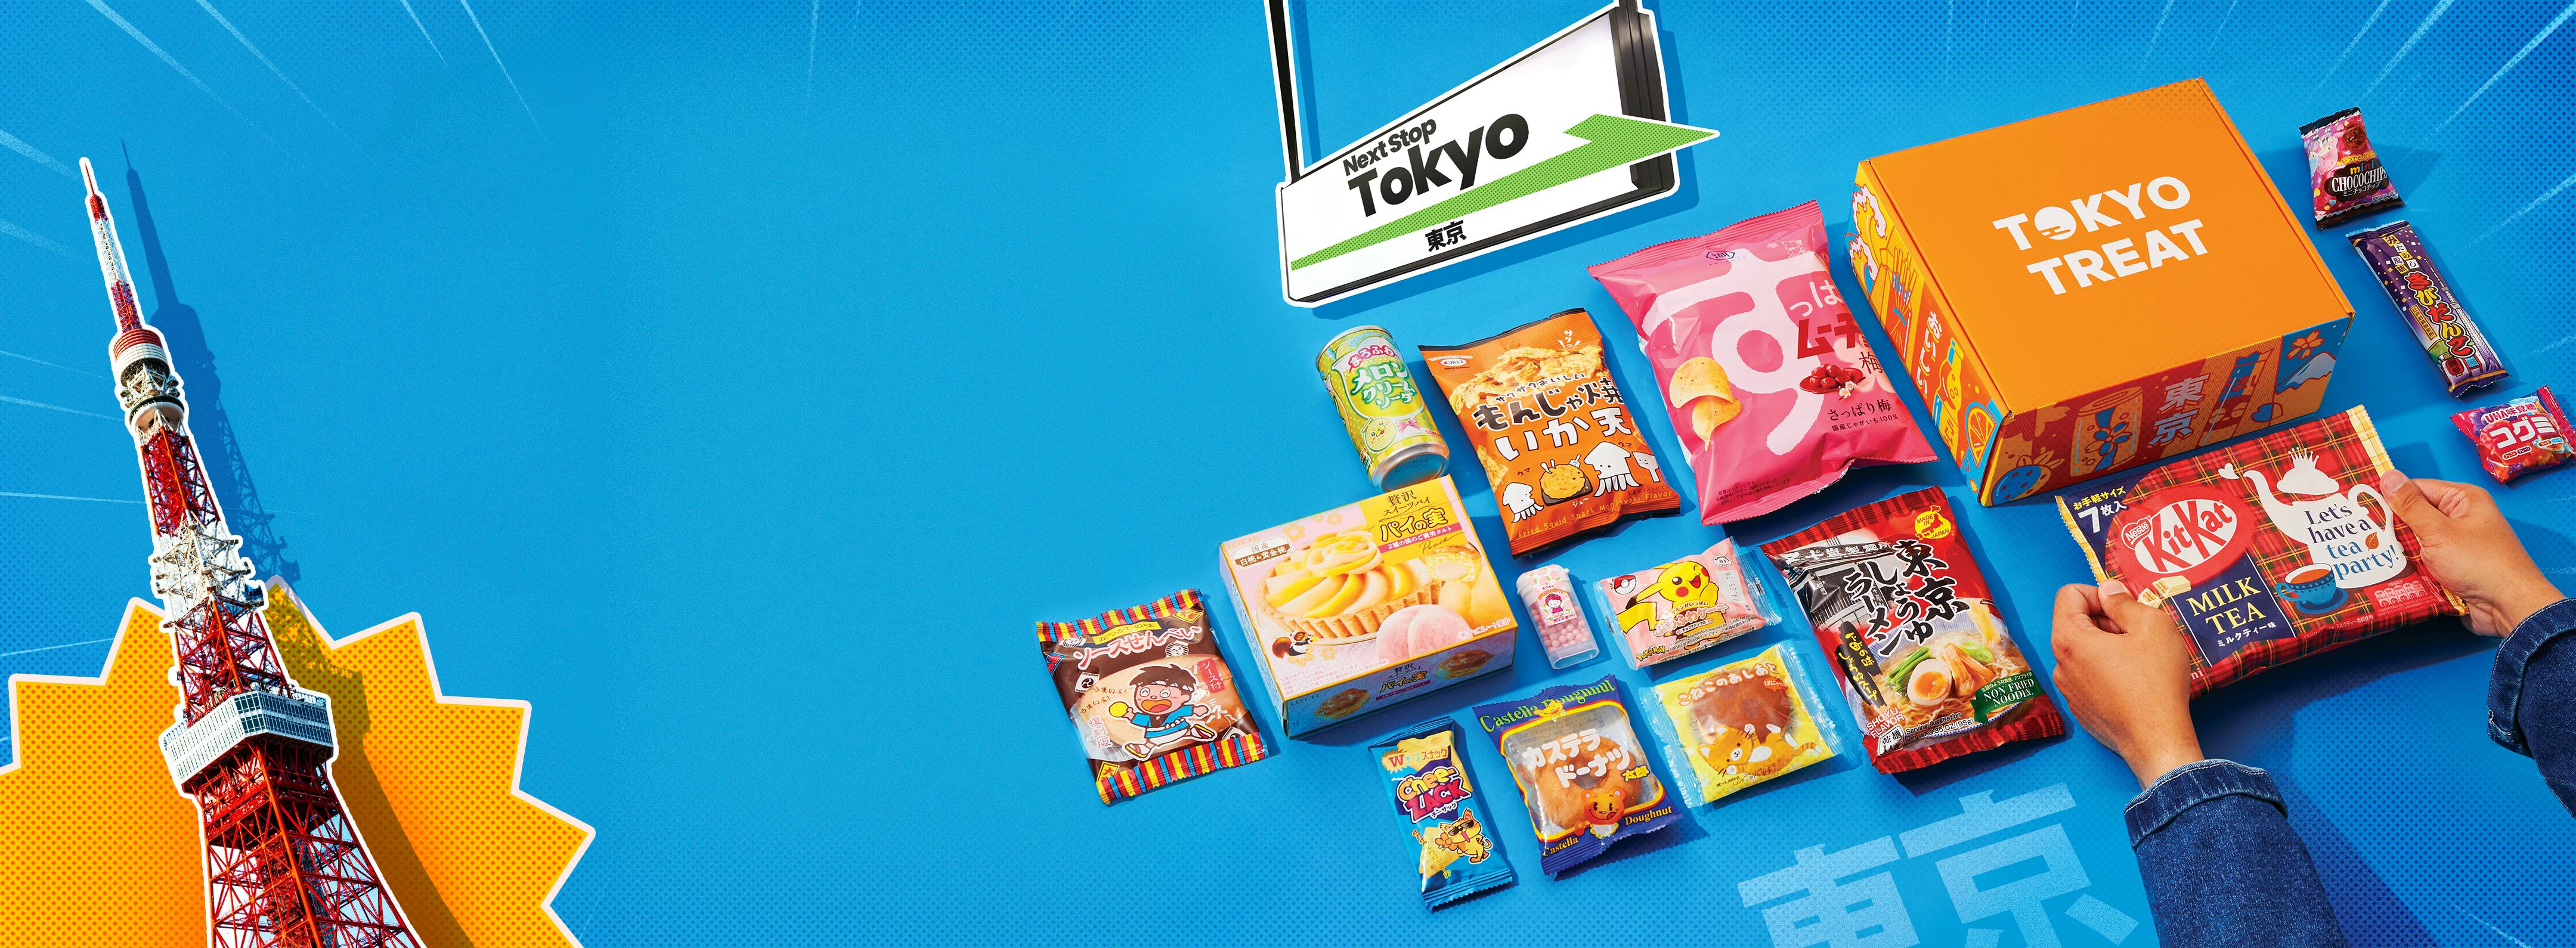 The TokyoTreat box sits on a blue background, surrounded by Tokyo landmarks and motifs.